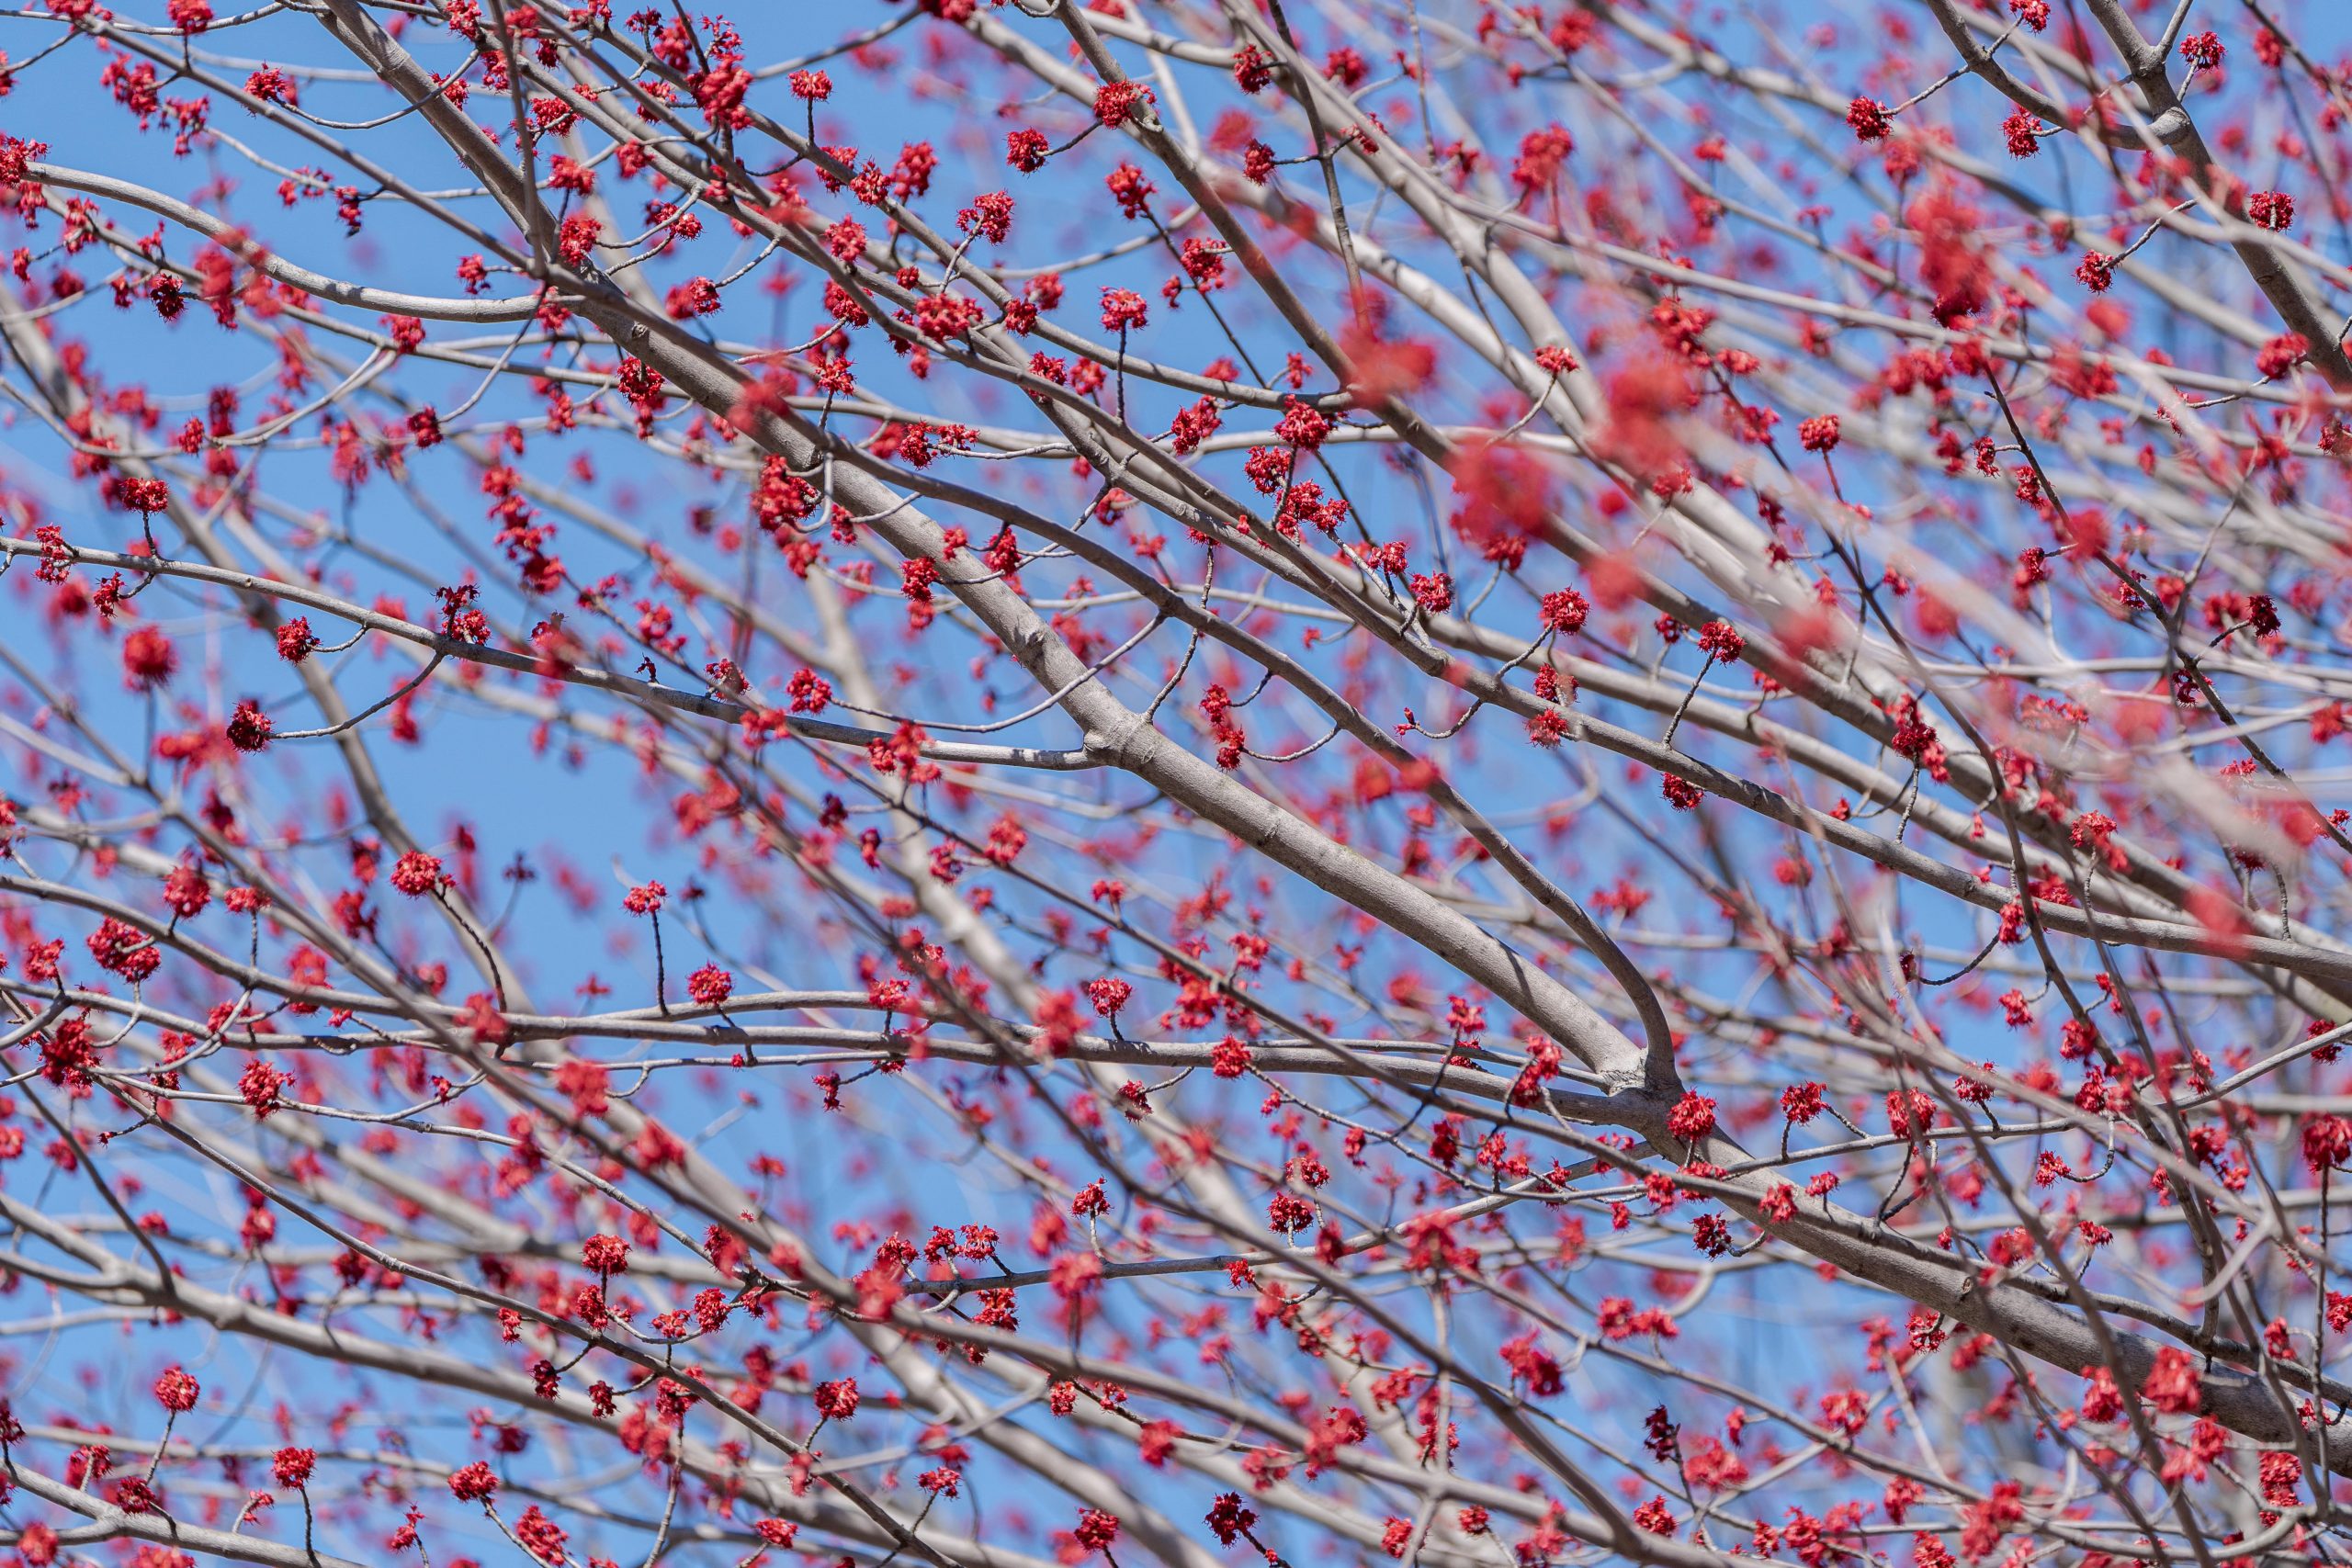 Small red flowers bloom in abundance with a blue sky beyond